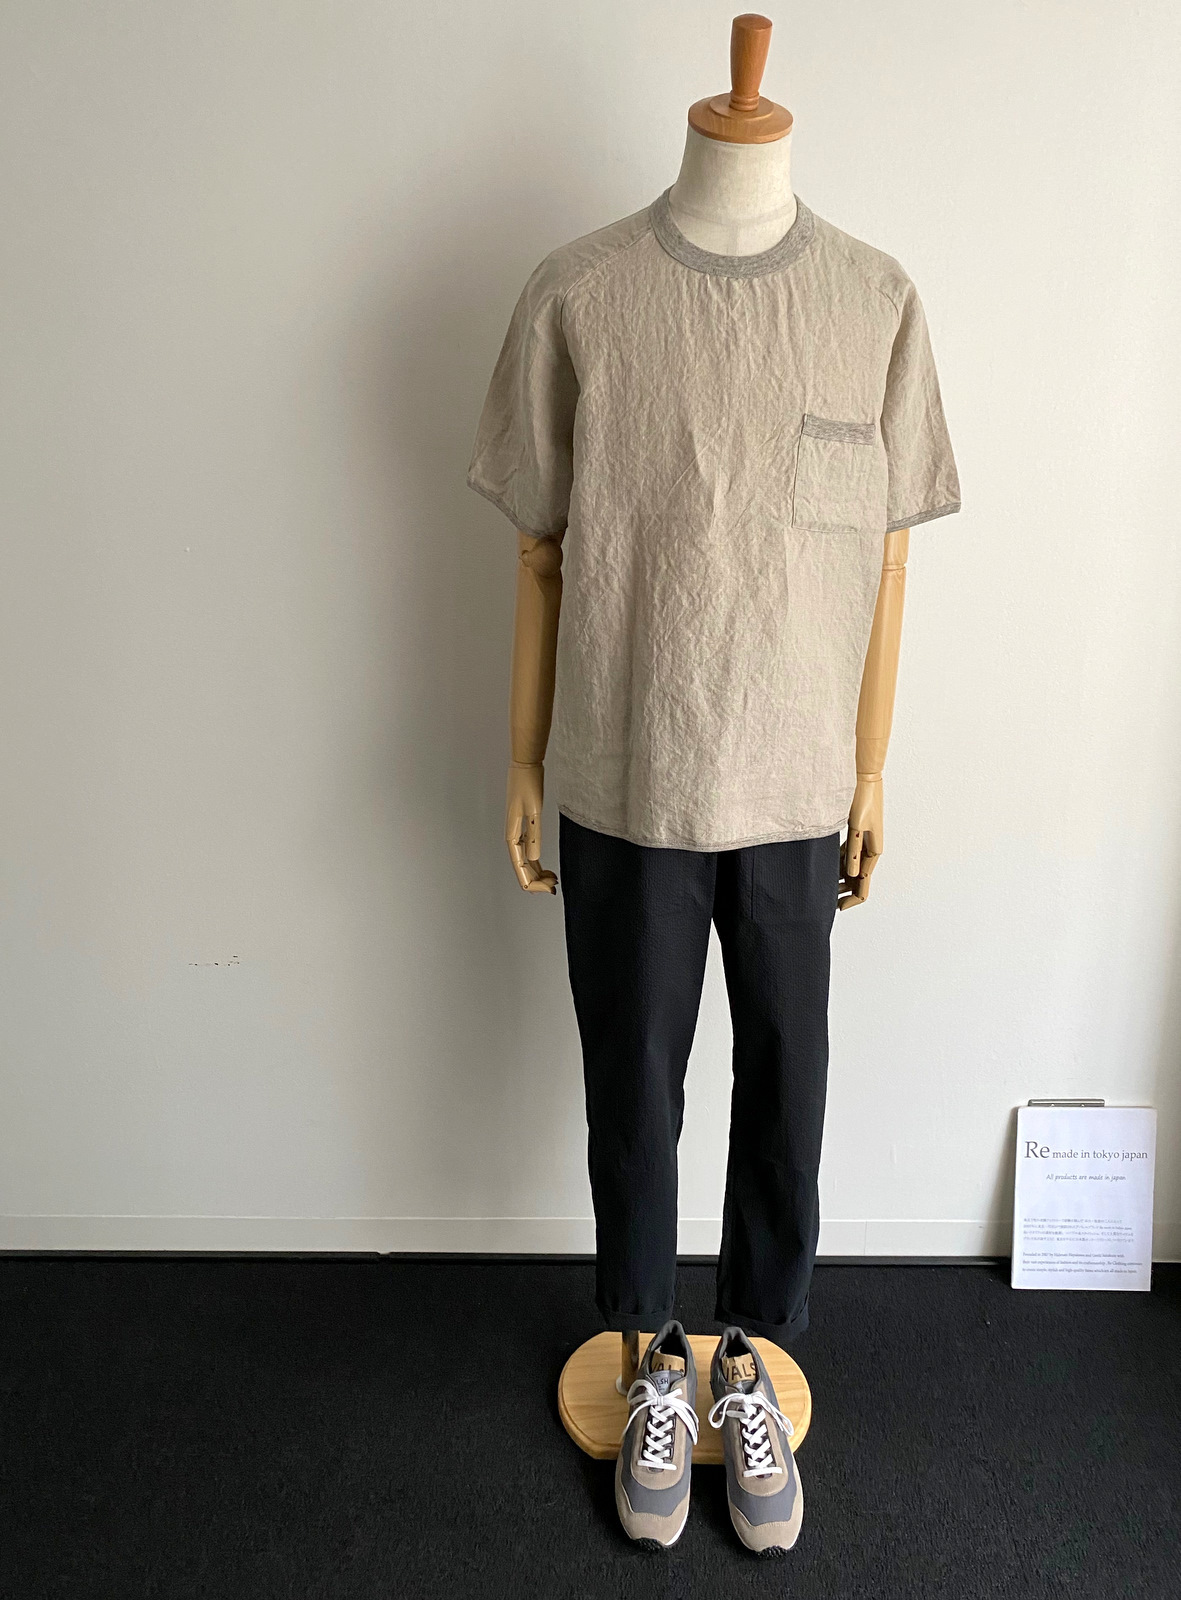 French Linen T-shirt : 【Re made in tokyo japan】NEW ITEM INFO